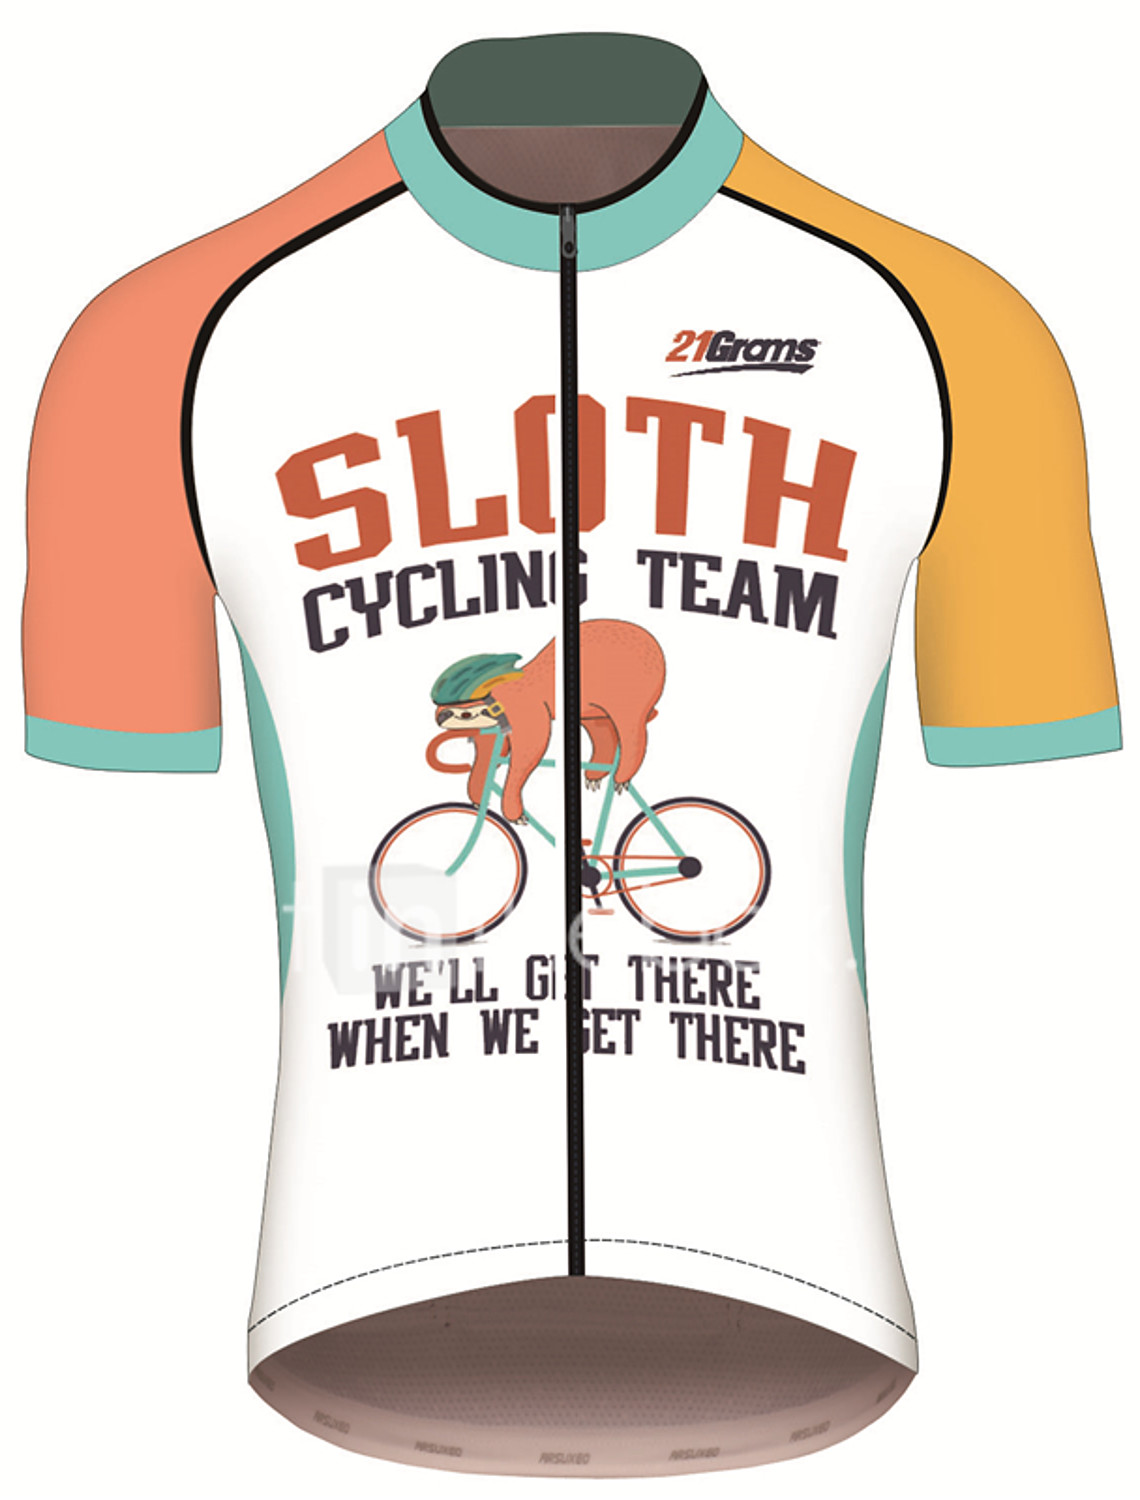 team sloth cycling jersey